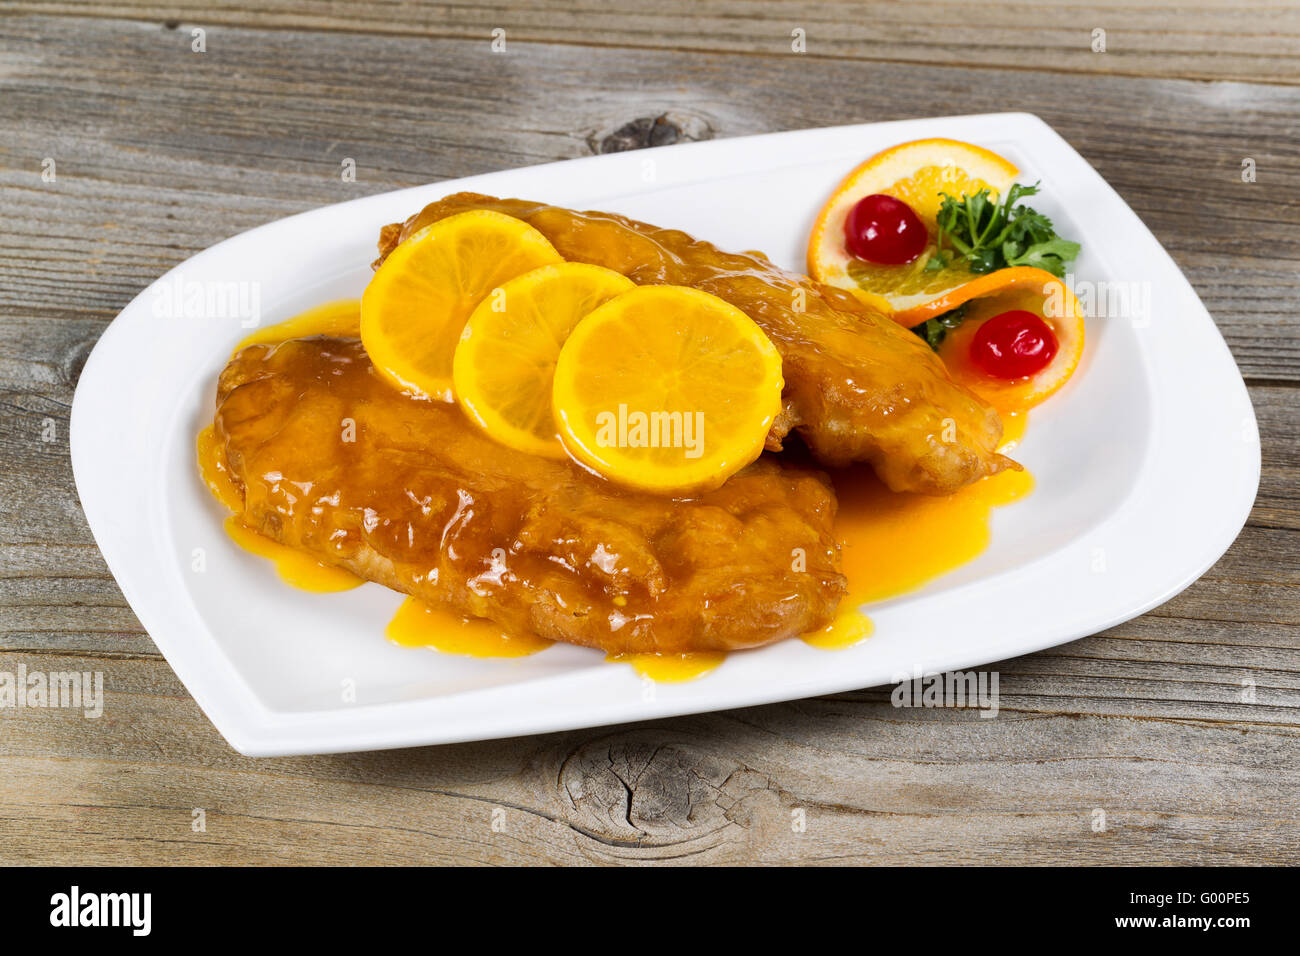 Fried chicken with lemon sauce ready to eat Stock Photo